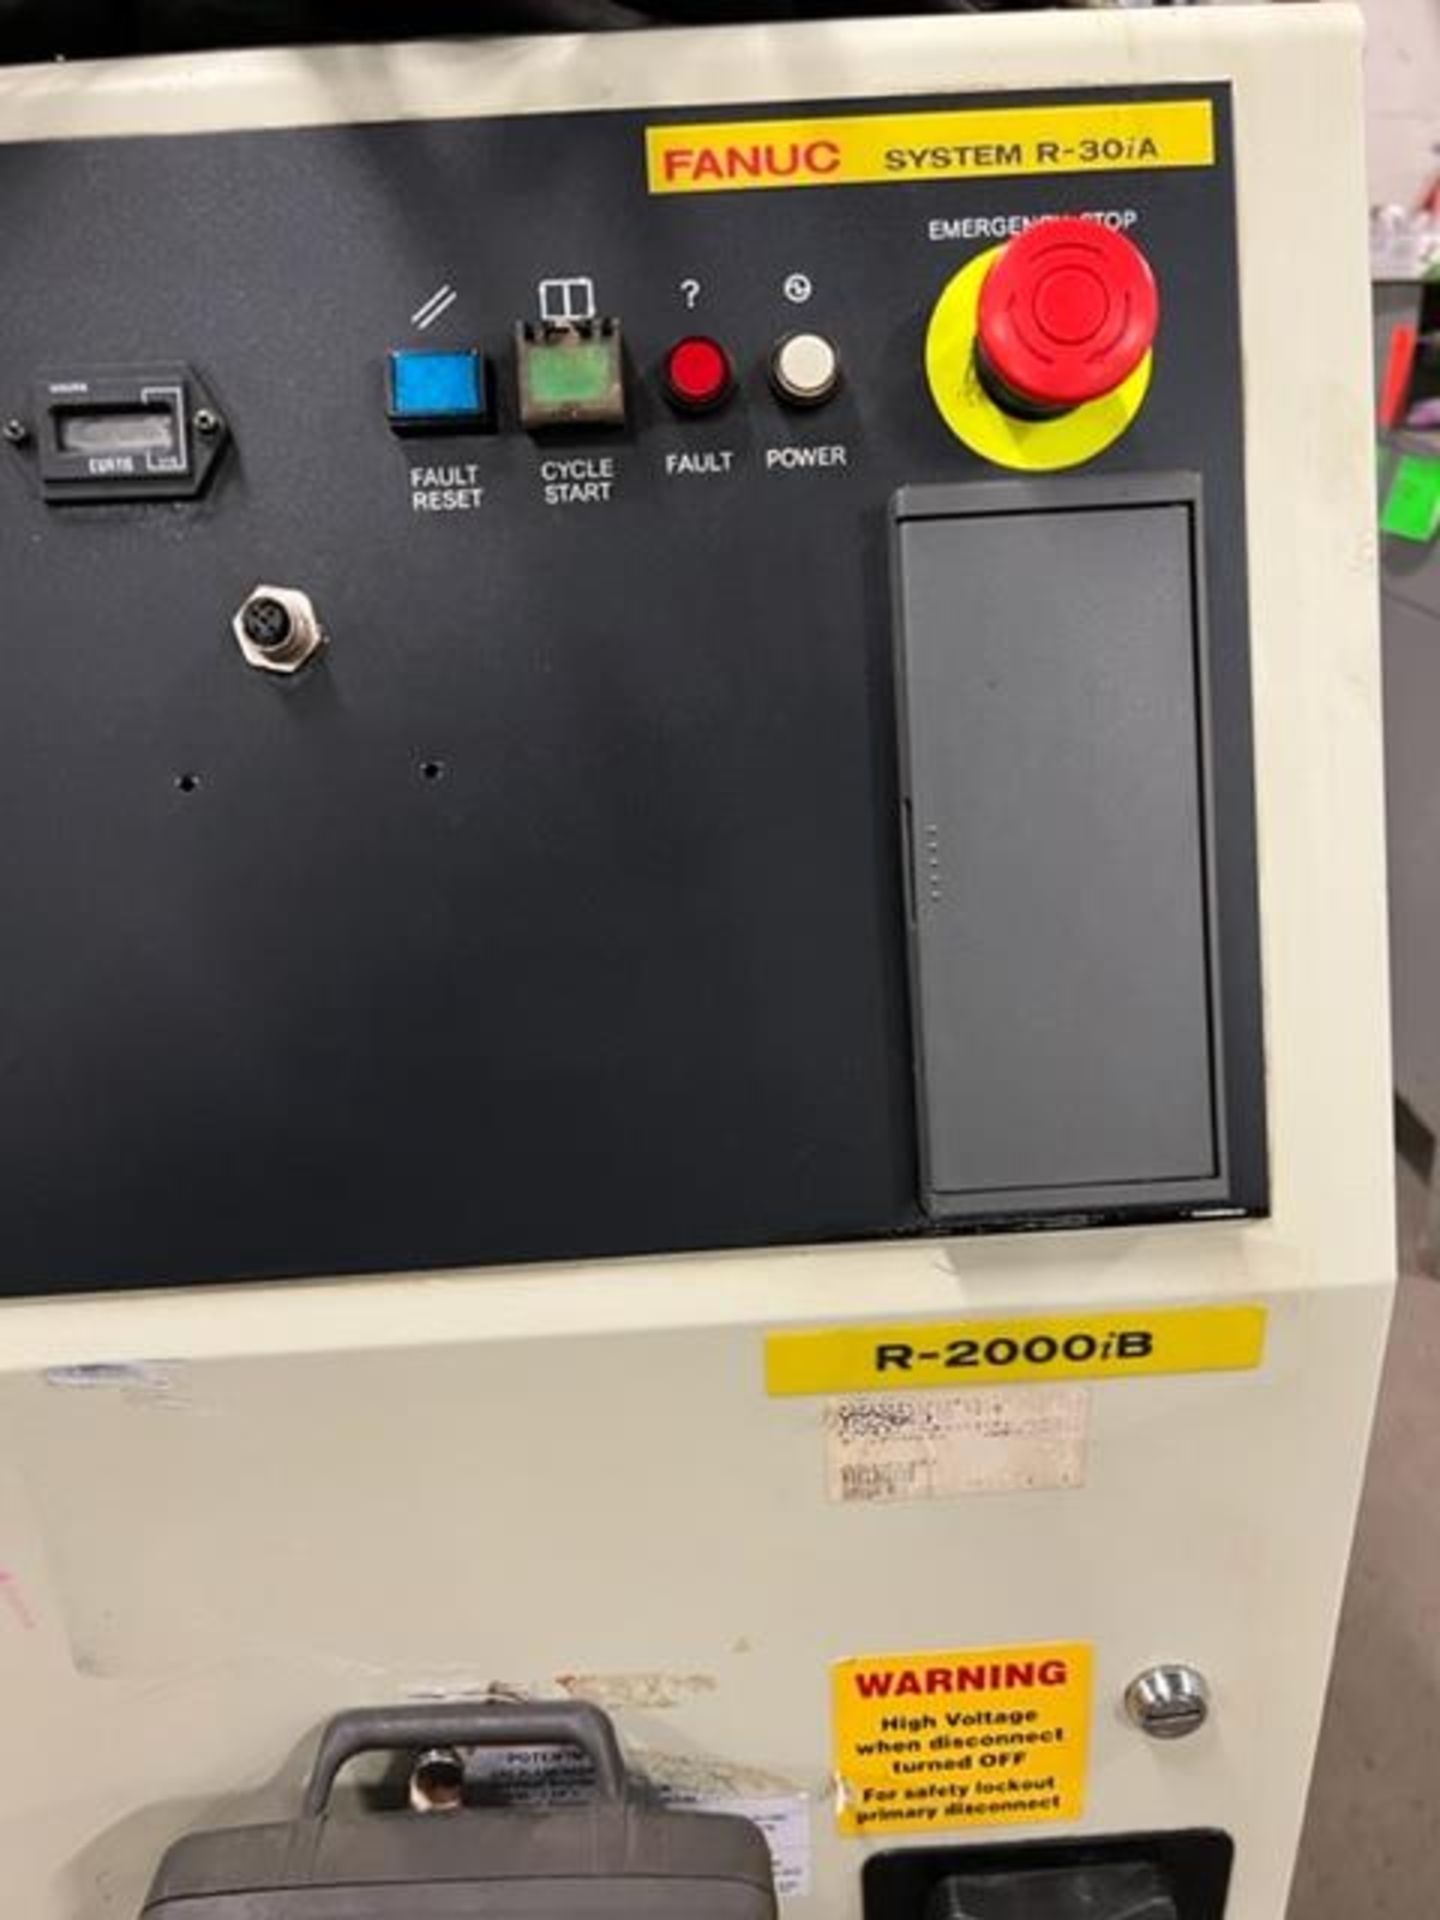 MINT 2009 Fanuc Handling Robot Model R-2000iB 125L - 125kg payload with R-30iA Controller and - Image 2 of 3